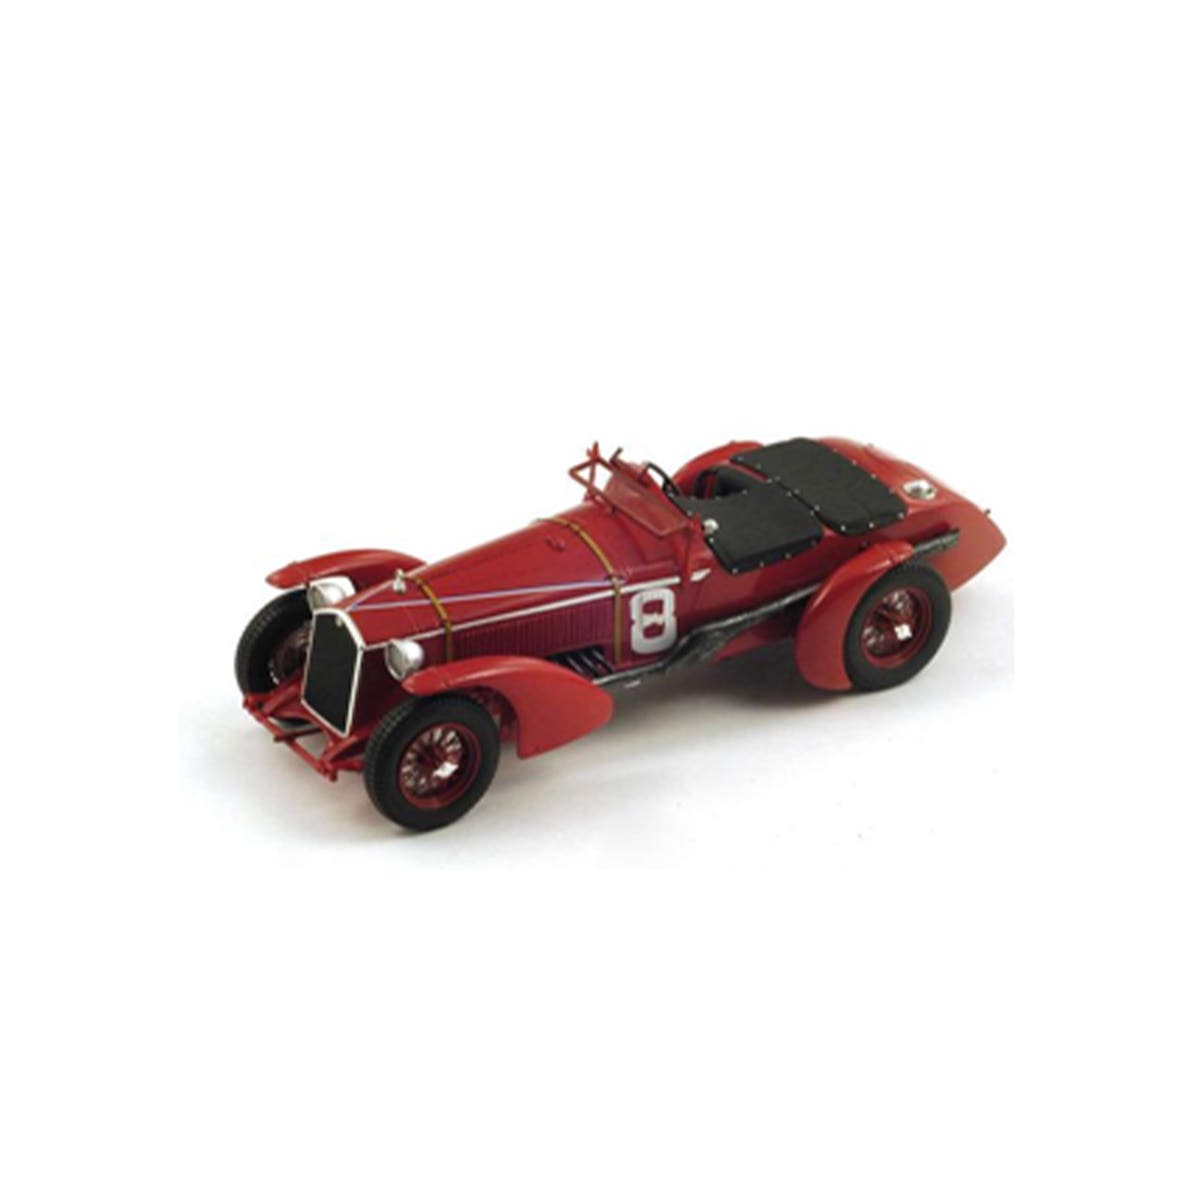 Alfa Romeo 8C No.8 Winner Le Mans 1932 - R. Sommer - L. Chinetti - With Acrylic Cover - 1:18 Scale Resin Model Car